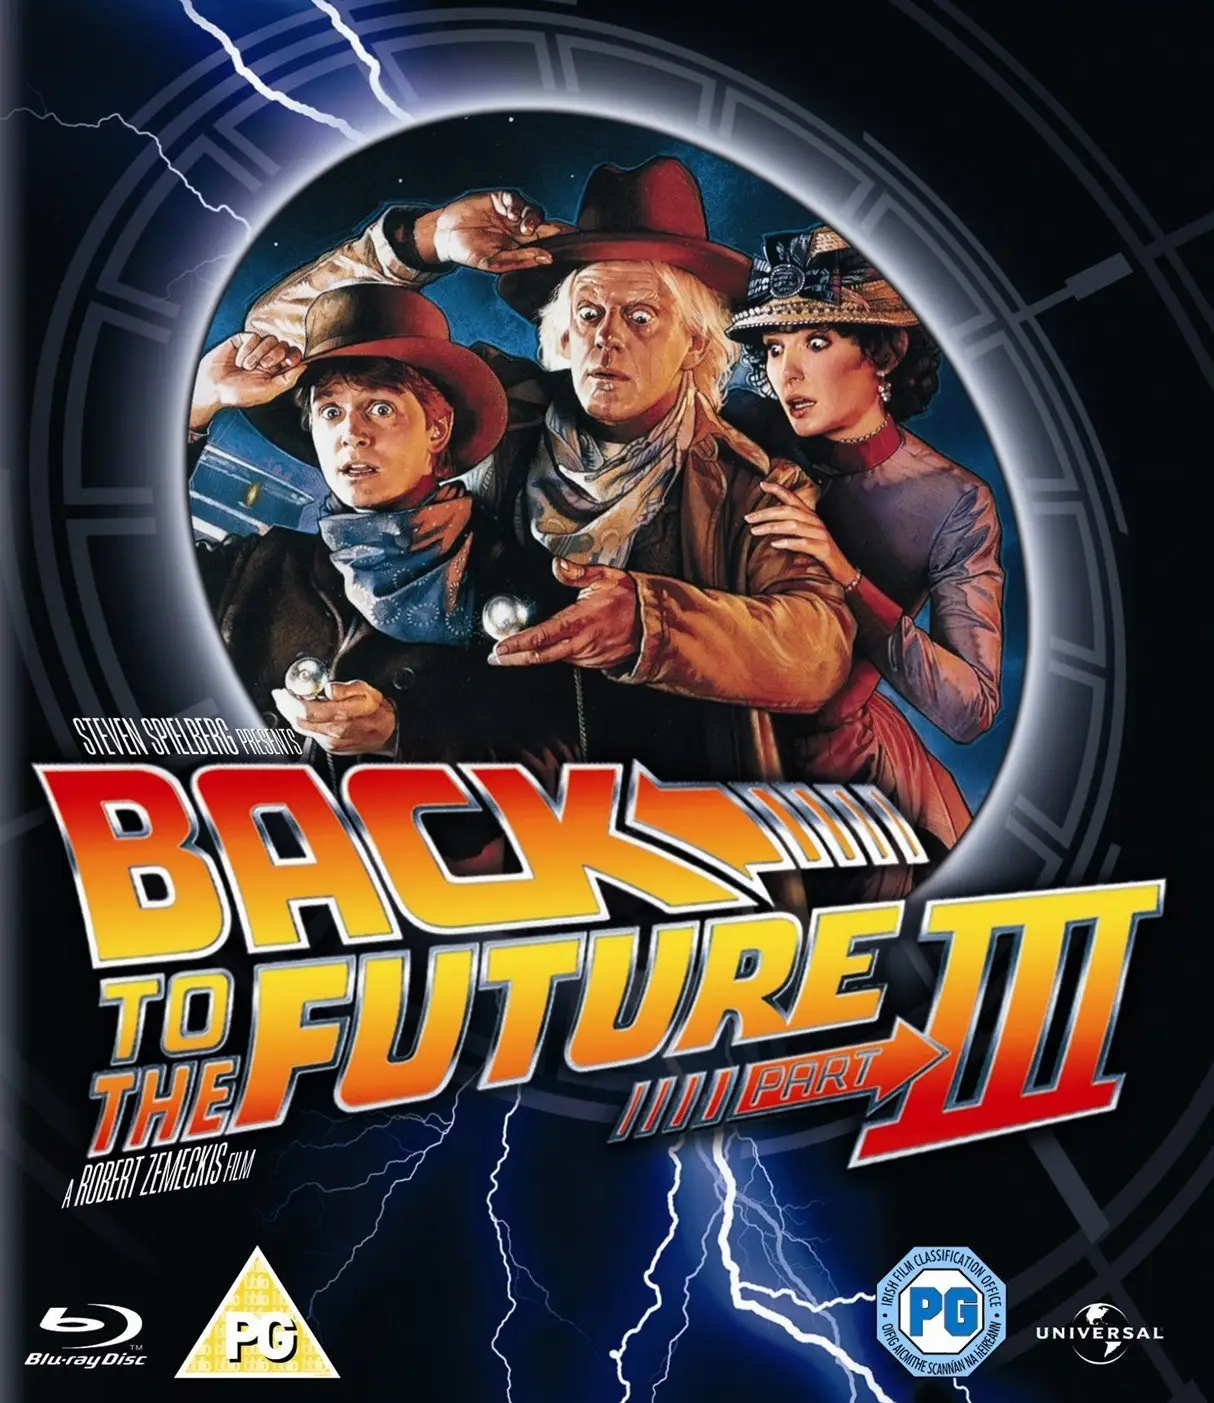 back to the future part iii 1990